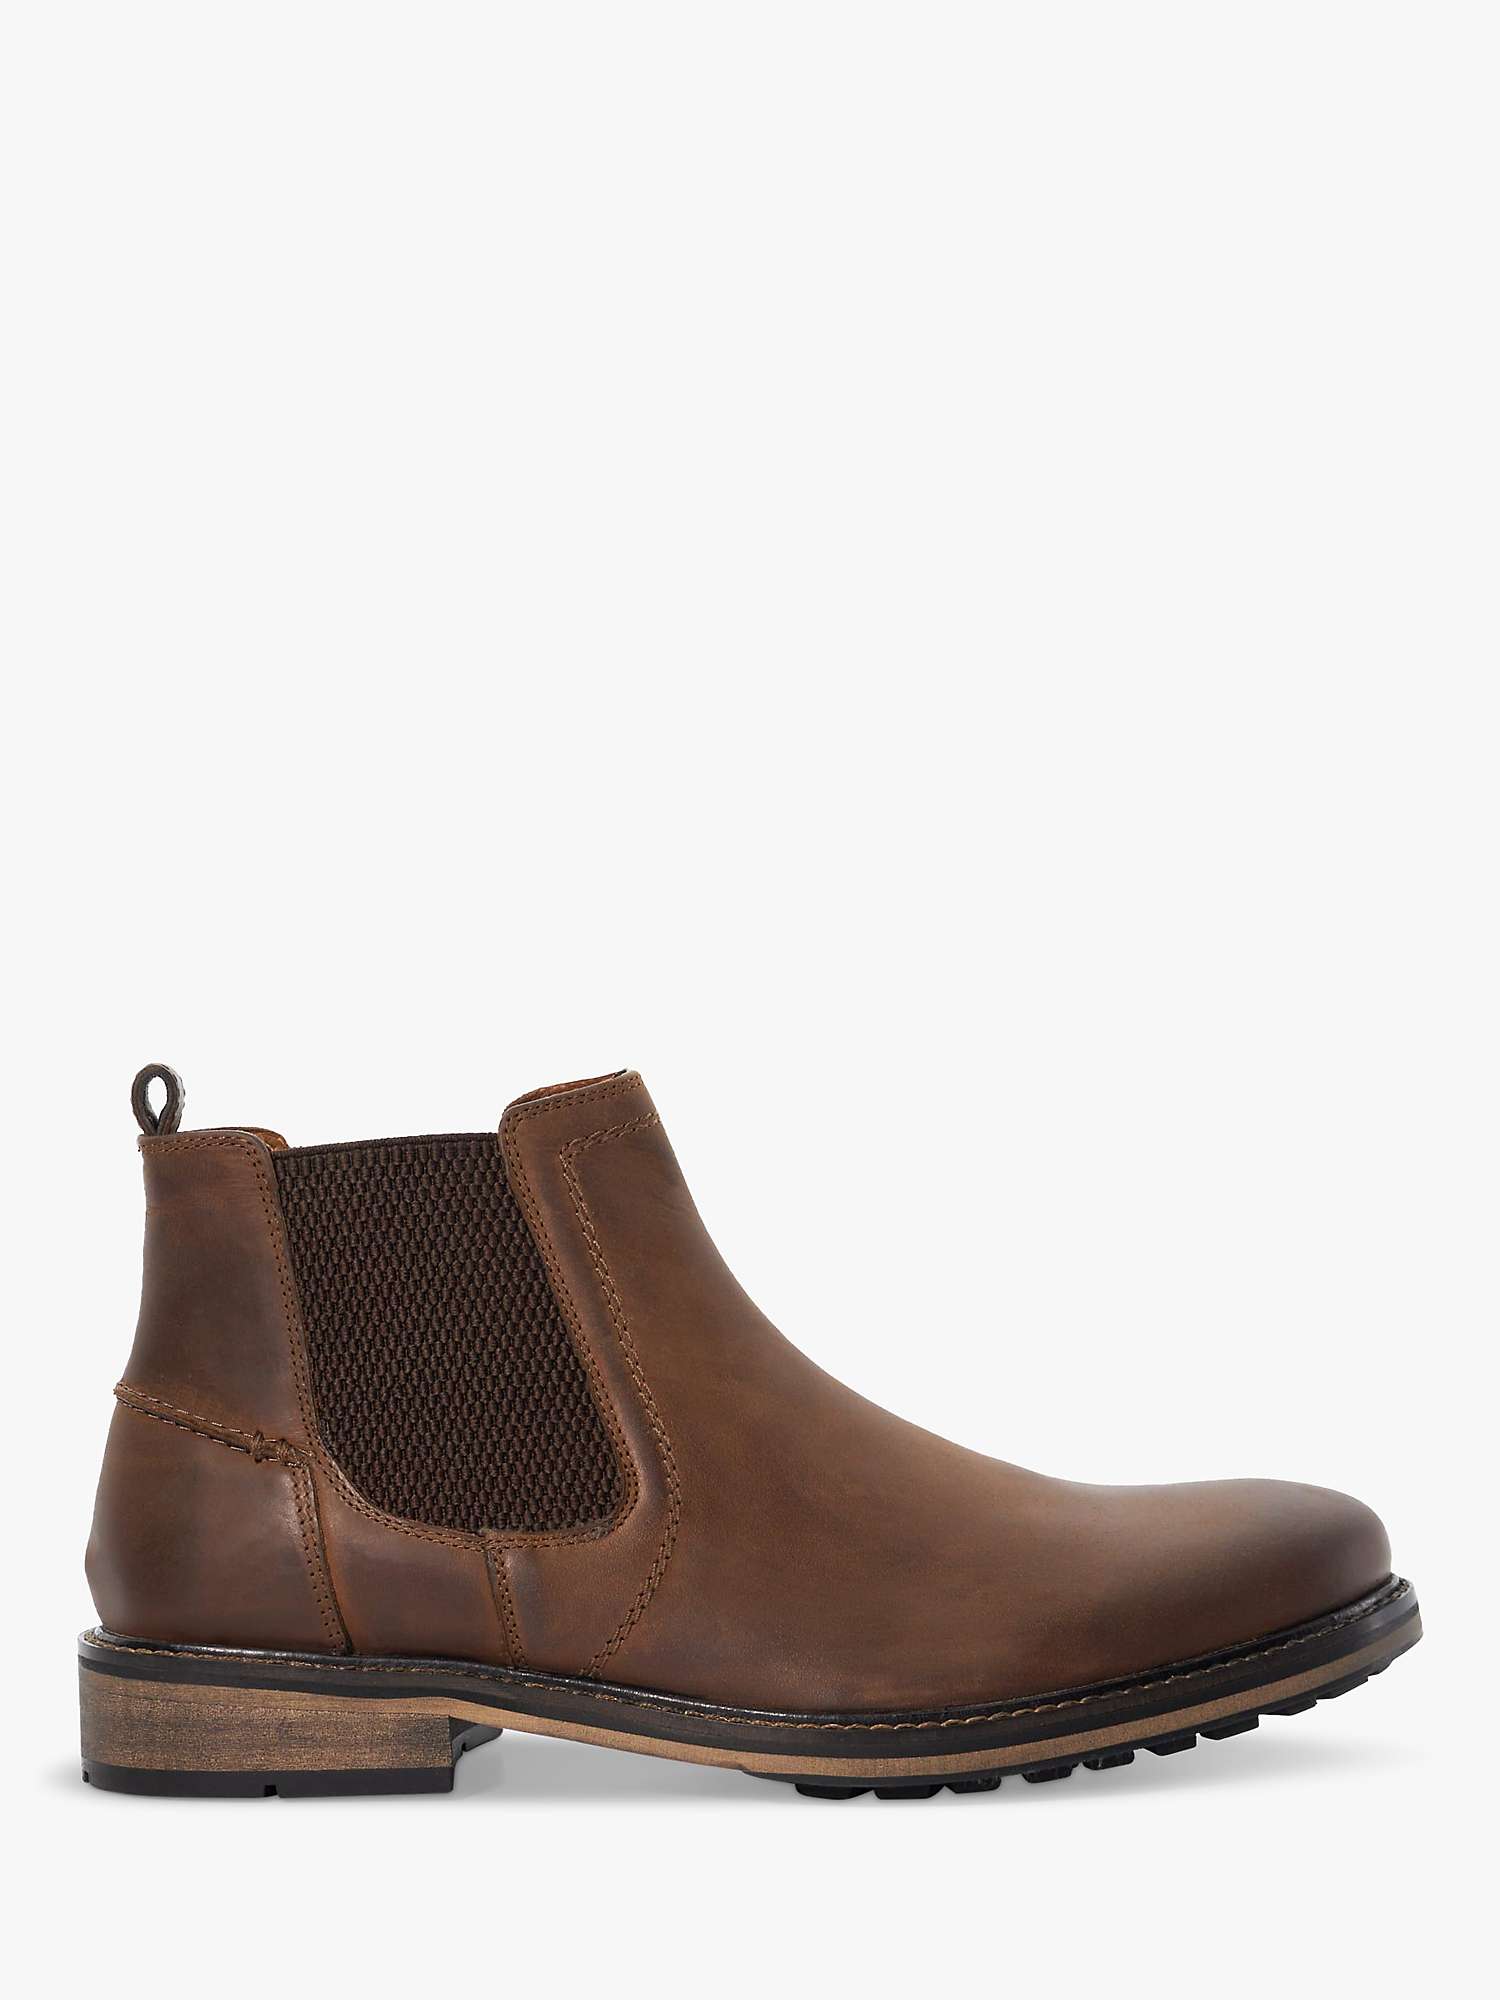 Buy Dune Chorleys Leather Boots, Brown Online at johnlewis.com